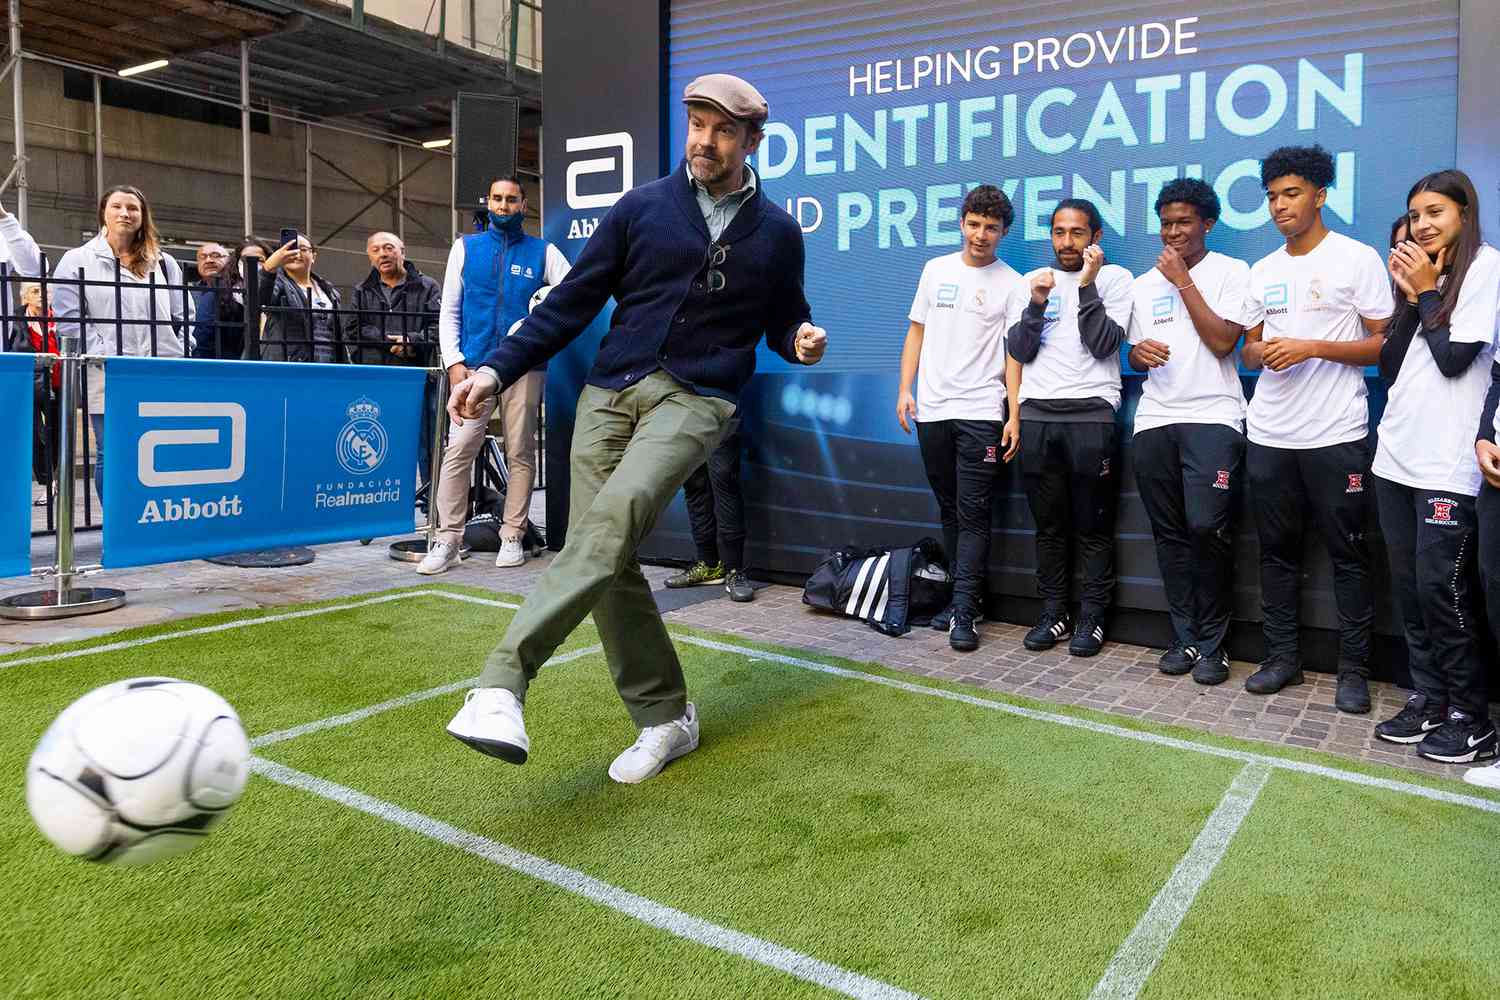 Actor Jason Sudeikis shows his soccer skills while running drills with teens from the Real Madrid Foundation's Social Sports School outside of the New York Stock Exchange (NYSE) following Abbott and Real Madrid's partnership announcement on Monday, Oct. 18, 2021, in New York